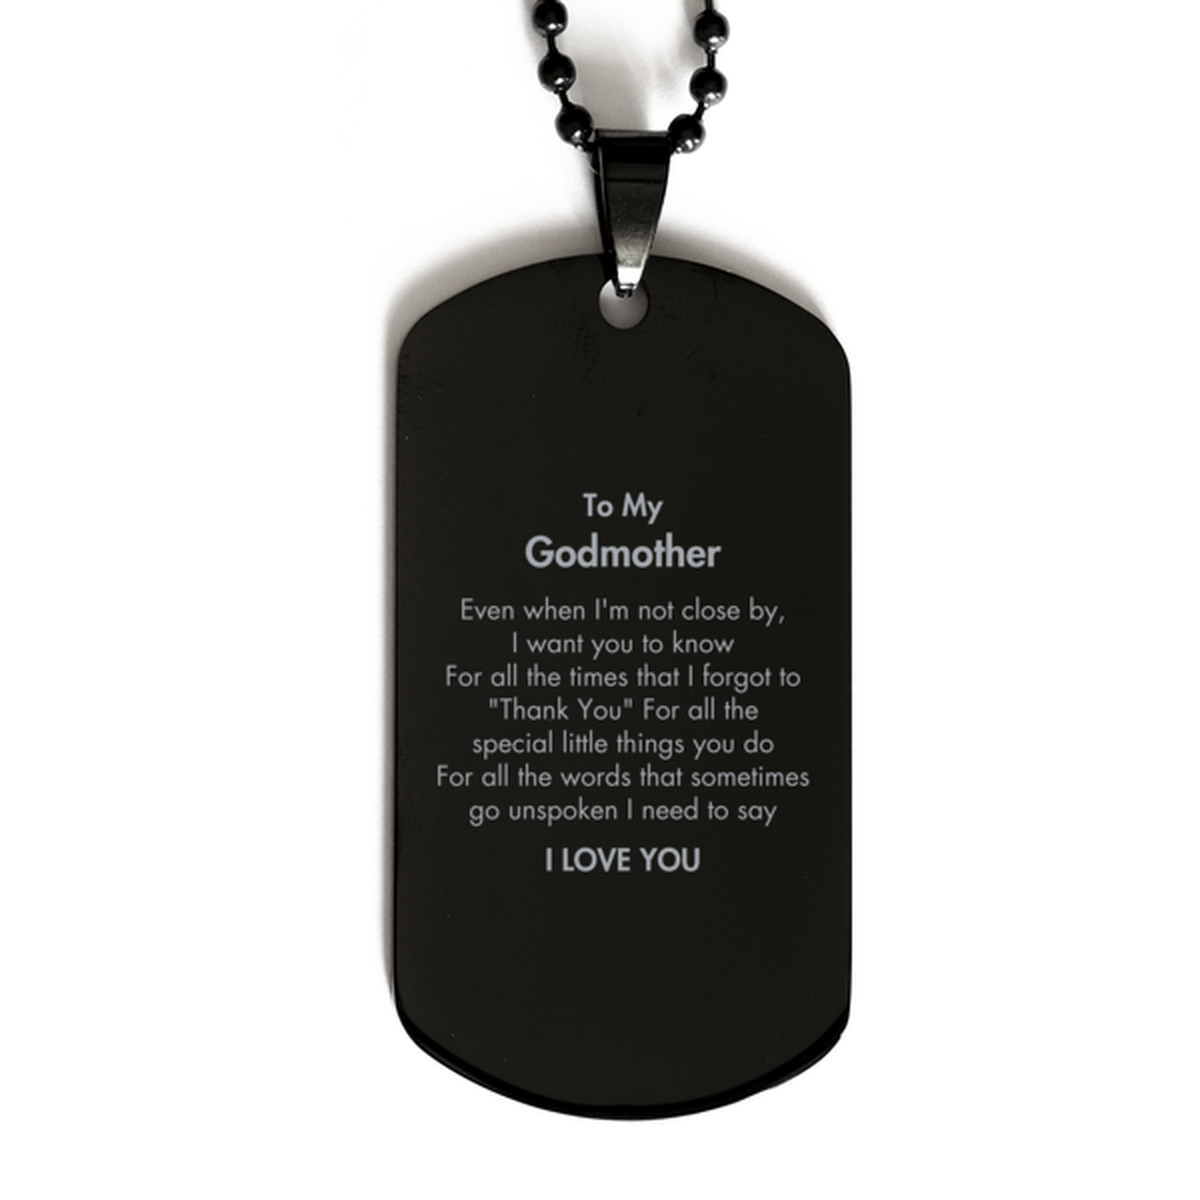 Thank You Gifts for Godmother, Keepsake Black Dog Tag Gifts for Godmother Birthday Mother's day Father's Day Godmother For all the words That sometimes go unspoken I need to say I LOVE YOU